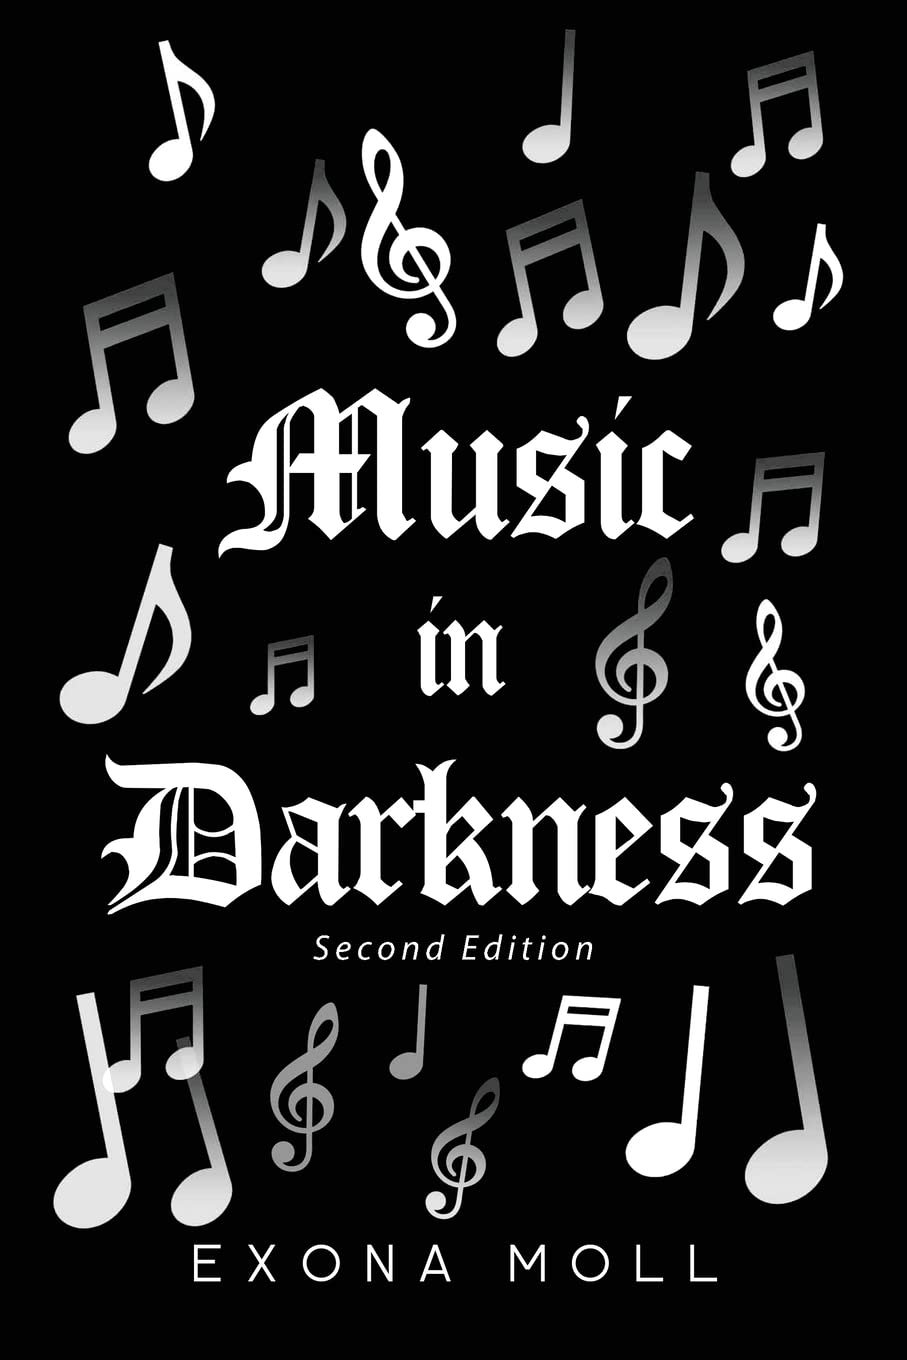 Music in Darkness - Second Edition by Exona Moll